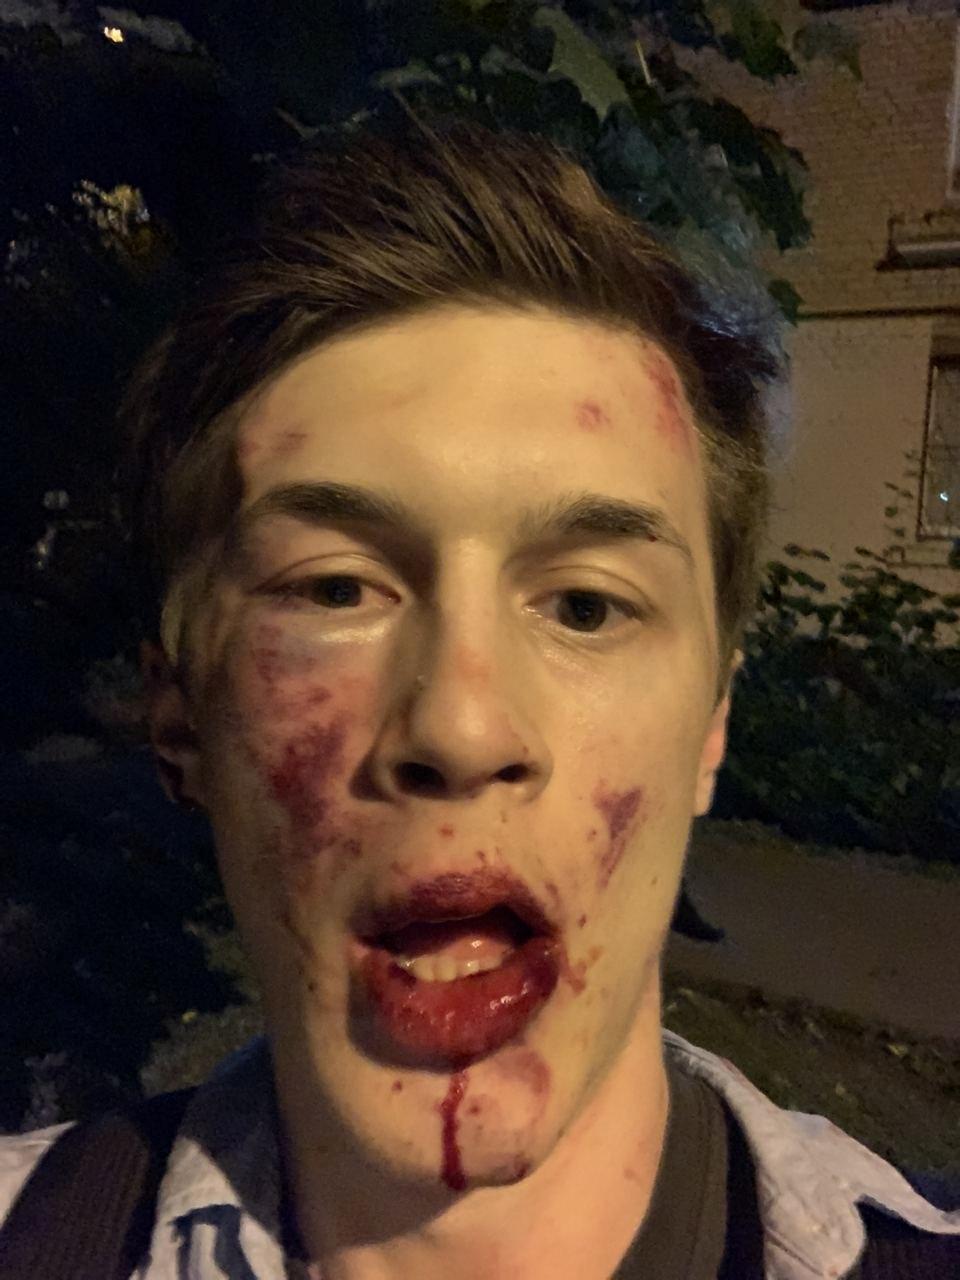 Opposition activist and political blogger Yegor Zhukov poses for a picture after he was assaulted by unknown people near his apartment in Moscow, on Aug. 30, 2020. (Zhukov's Team/Handout via Reuters)